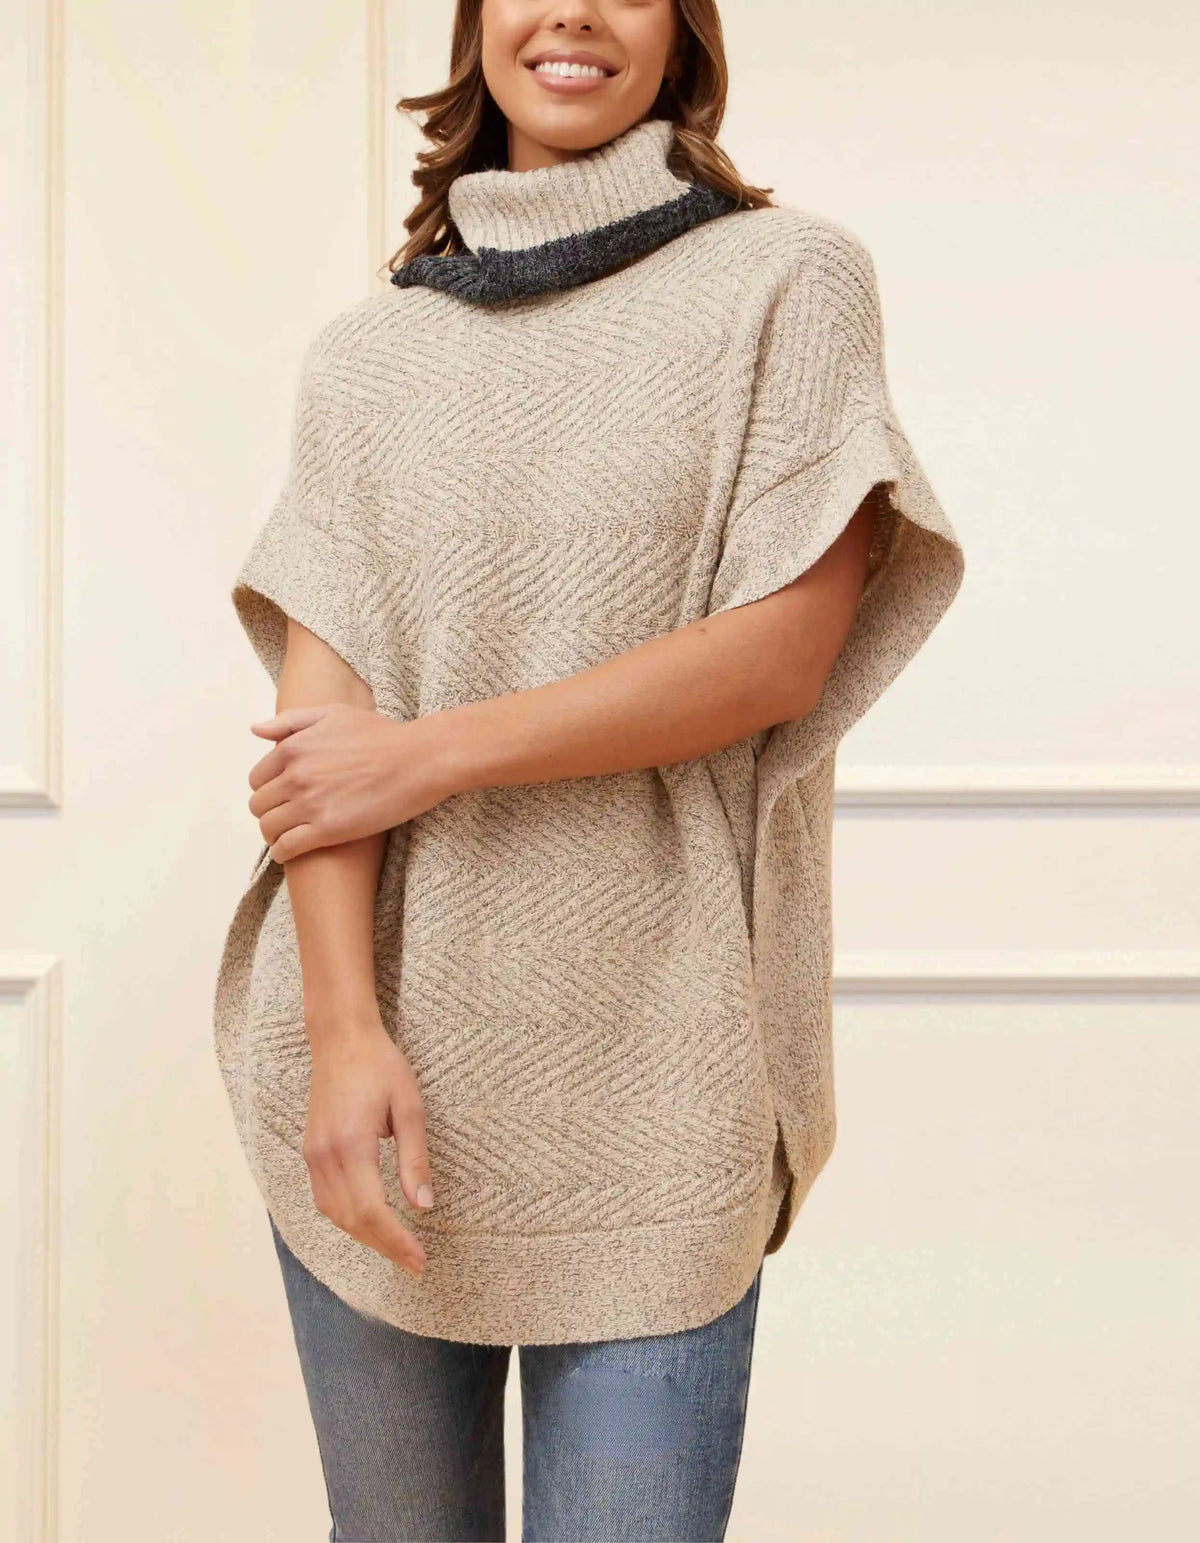 Gretchen Sweater Poncho Short Sleeves